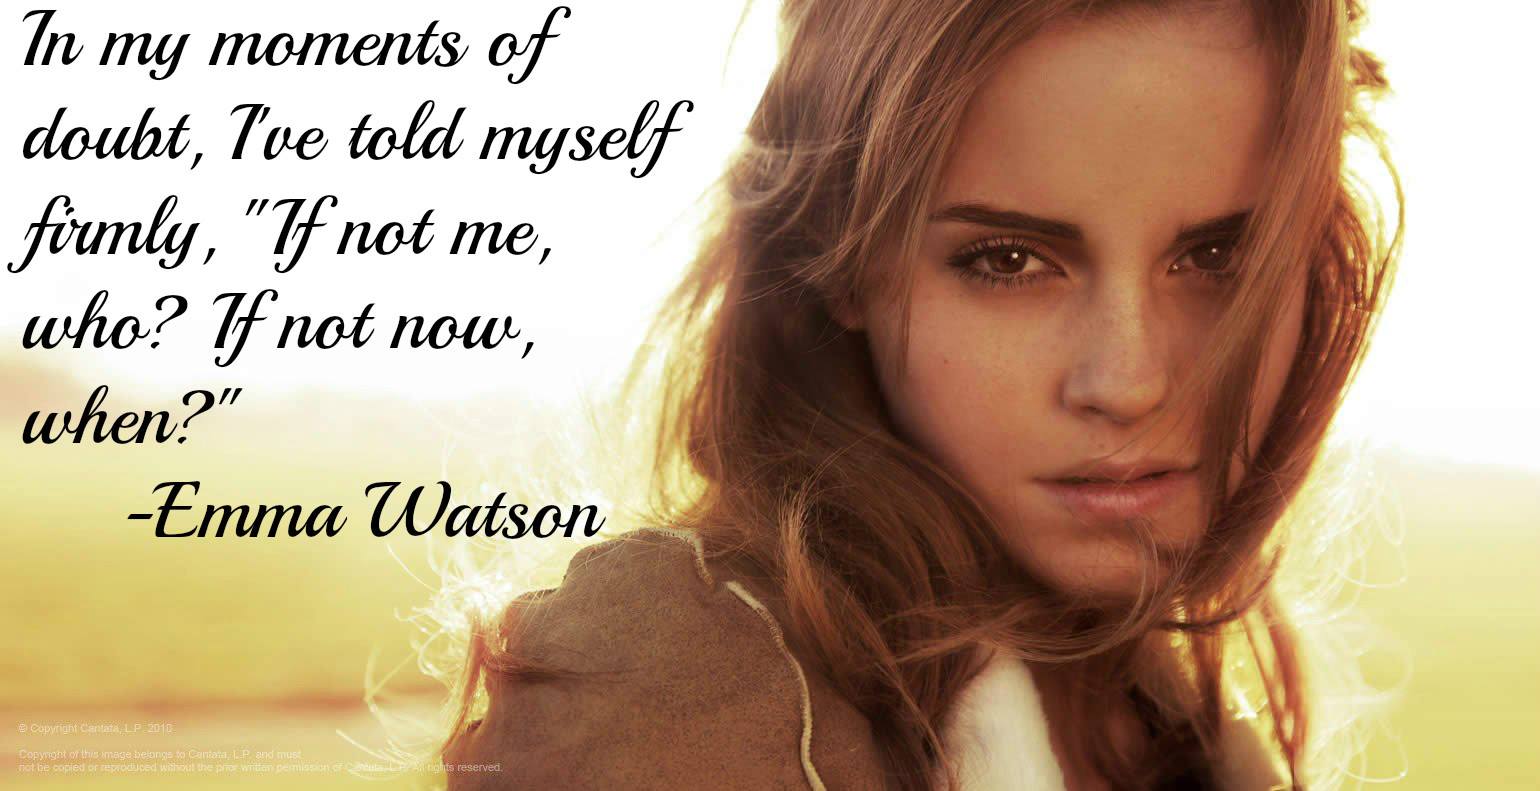 In my moments of doubt, I've told myself firmly, “If not me, who? If not now, when?”   -  Emma Watson